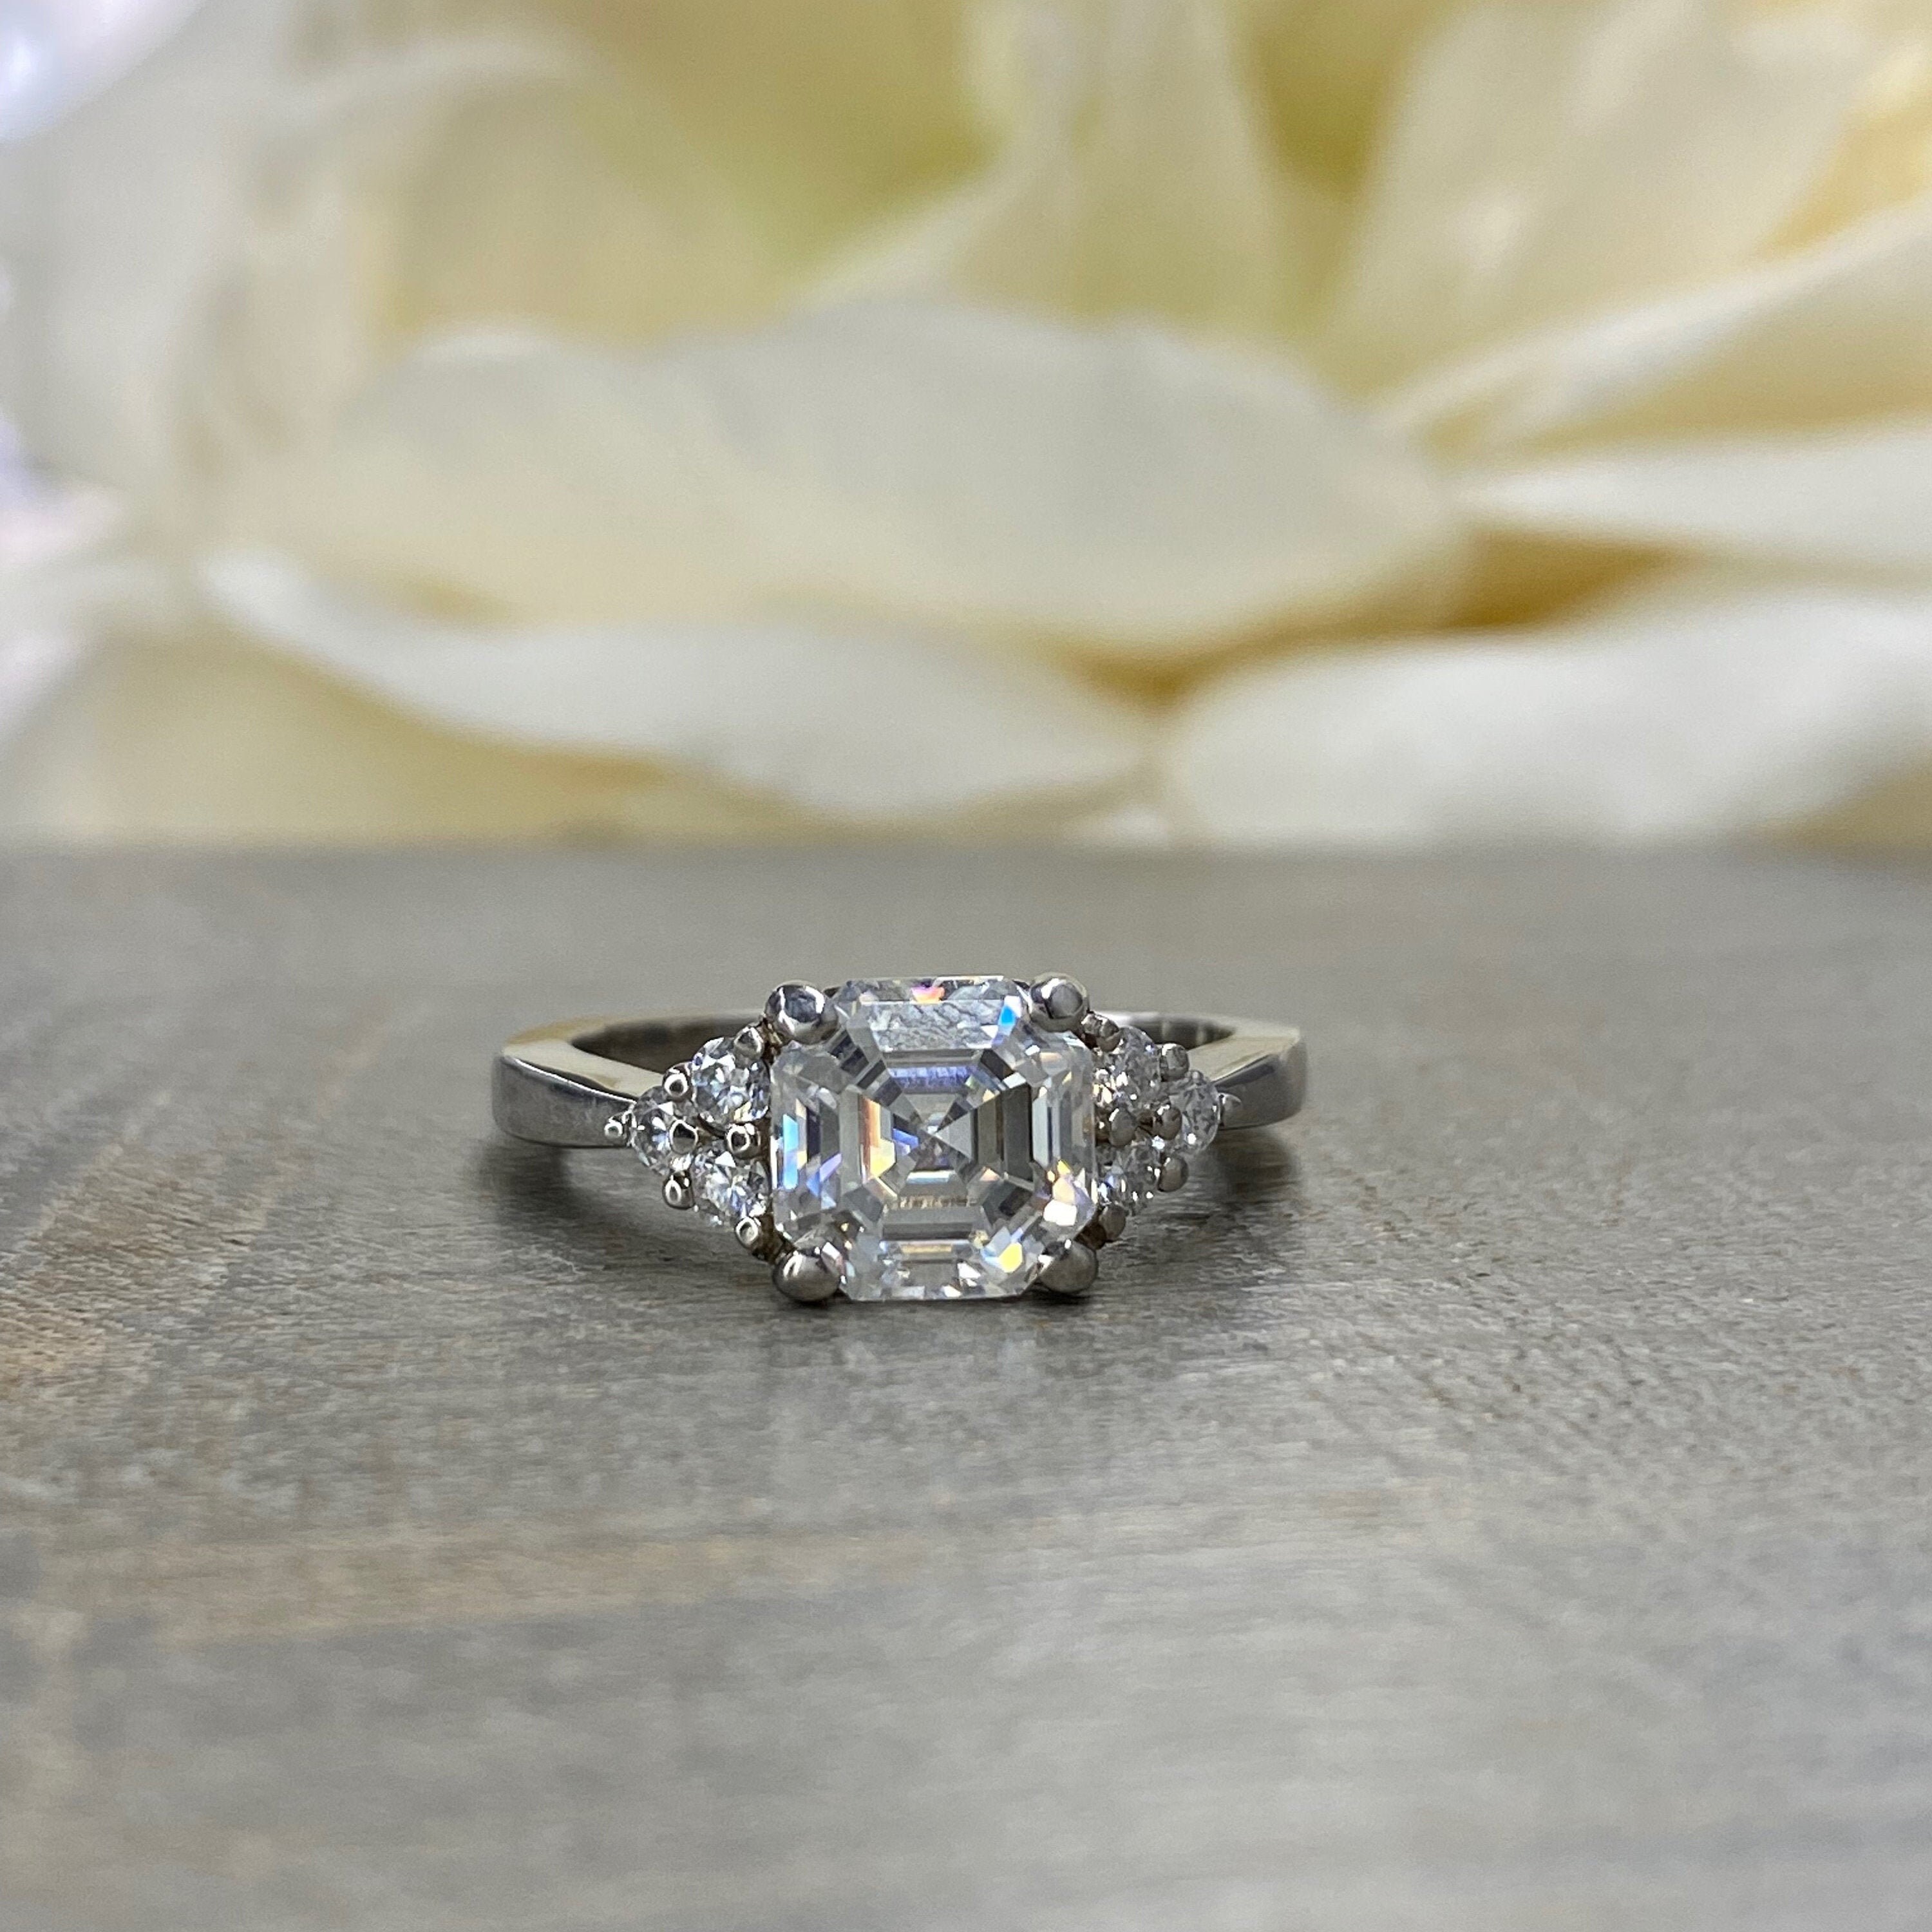 2.85CT Pear Moissanite Engagement Ring Wedding Bridal Halo Solitaire Antique Vintage Jewelry Gold Silver Anniversary Promise Gift For Her